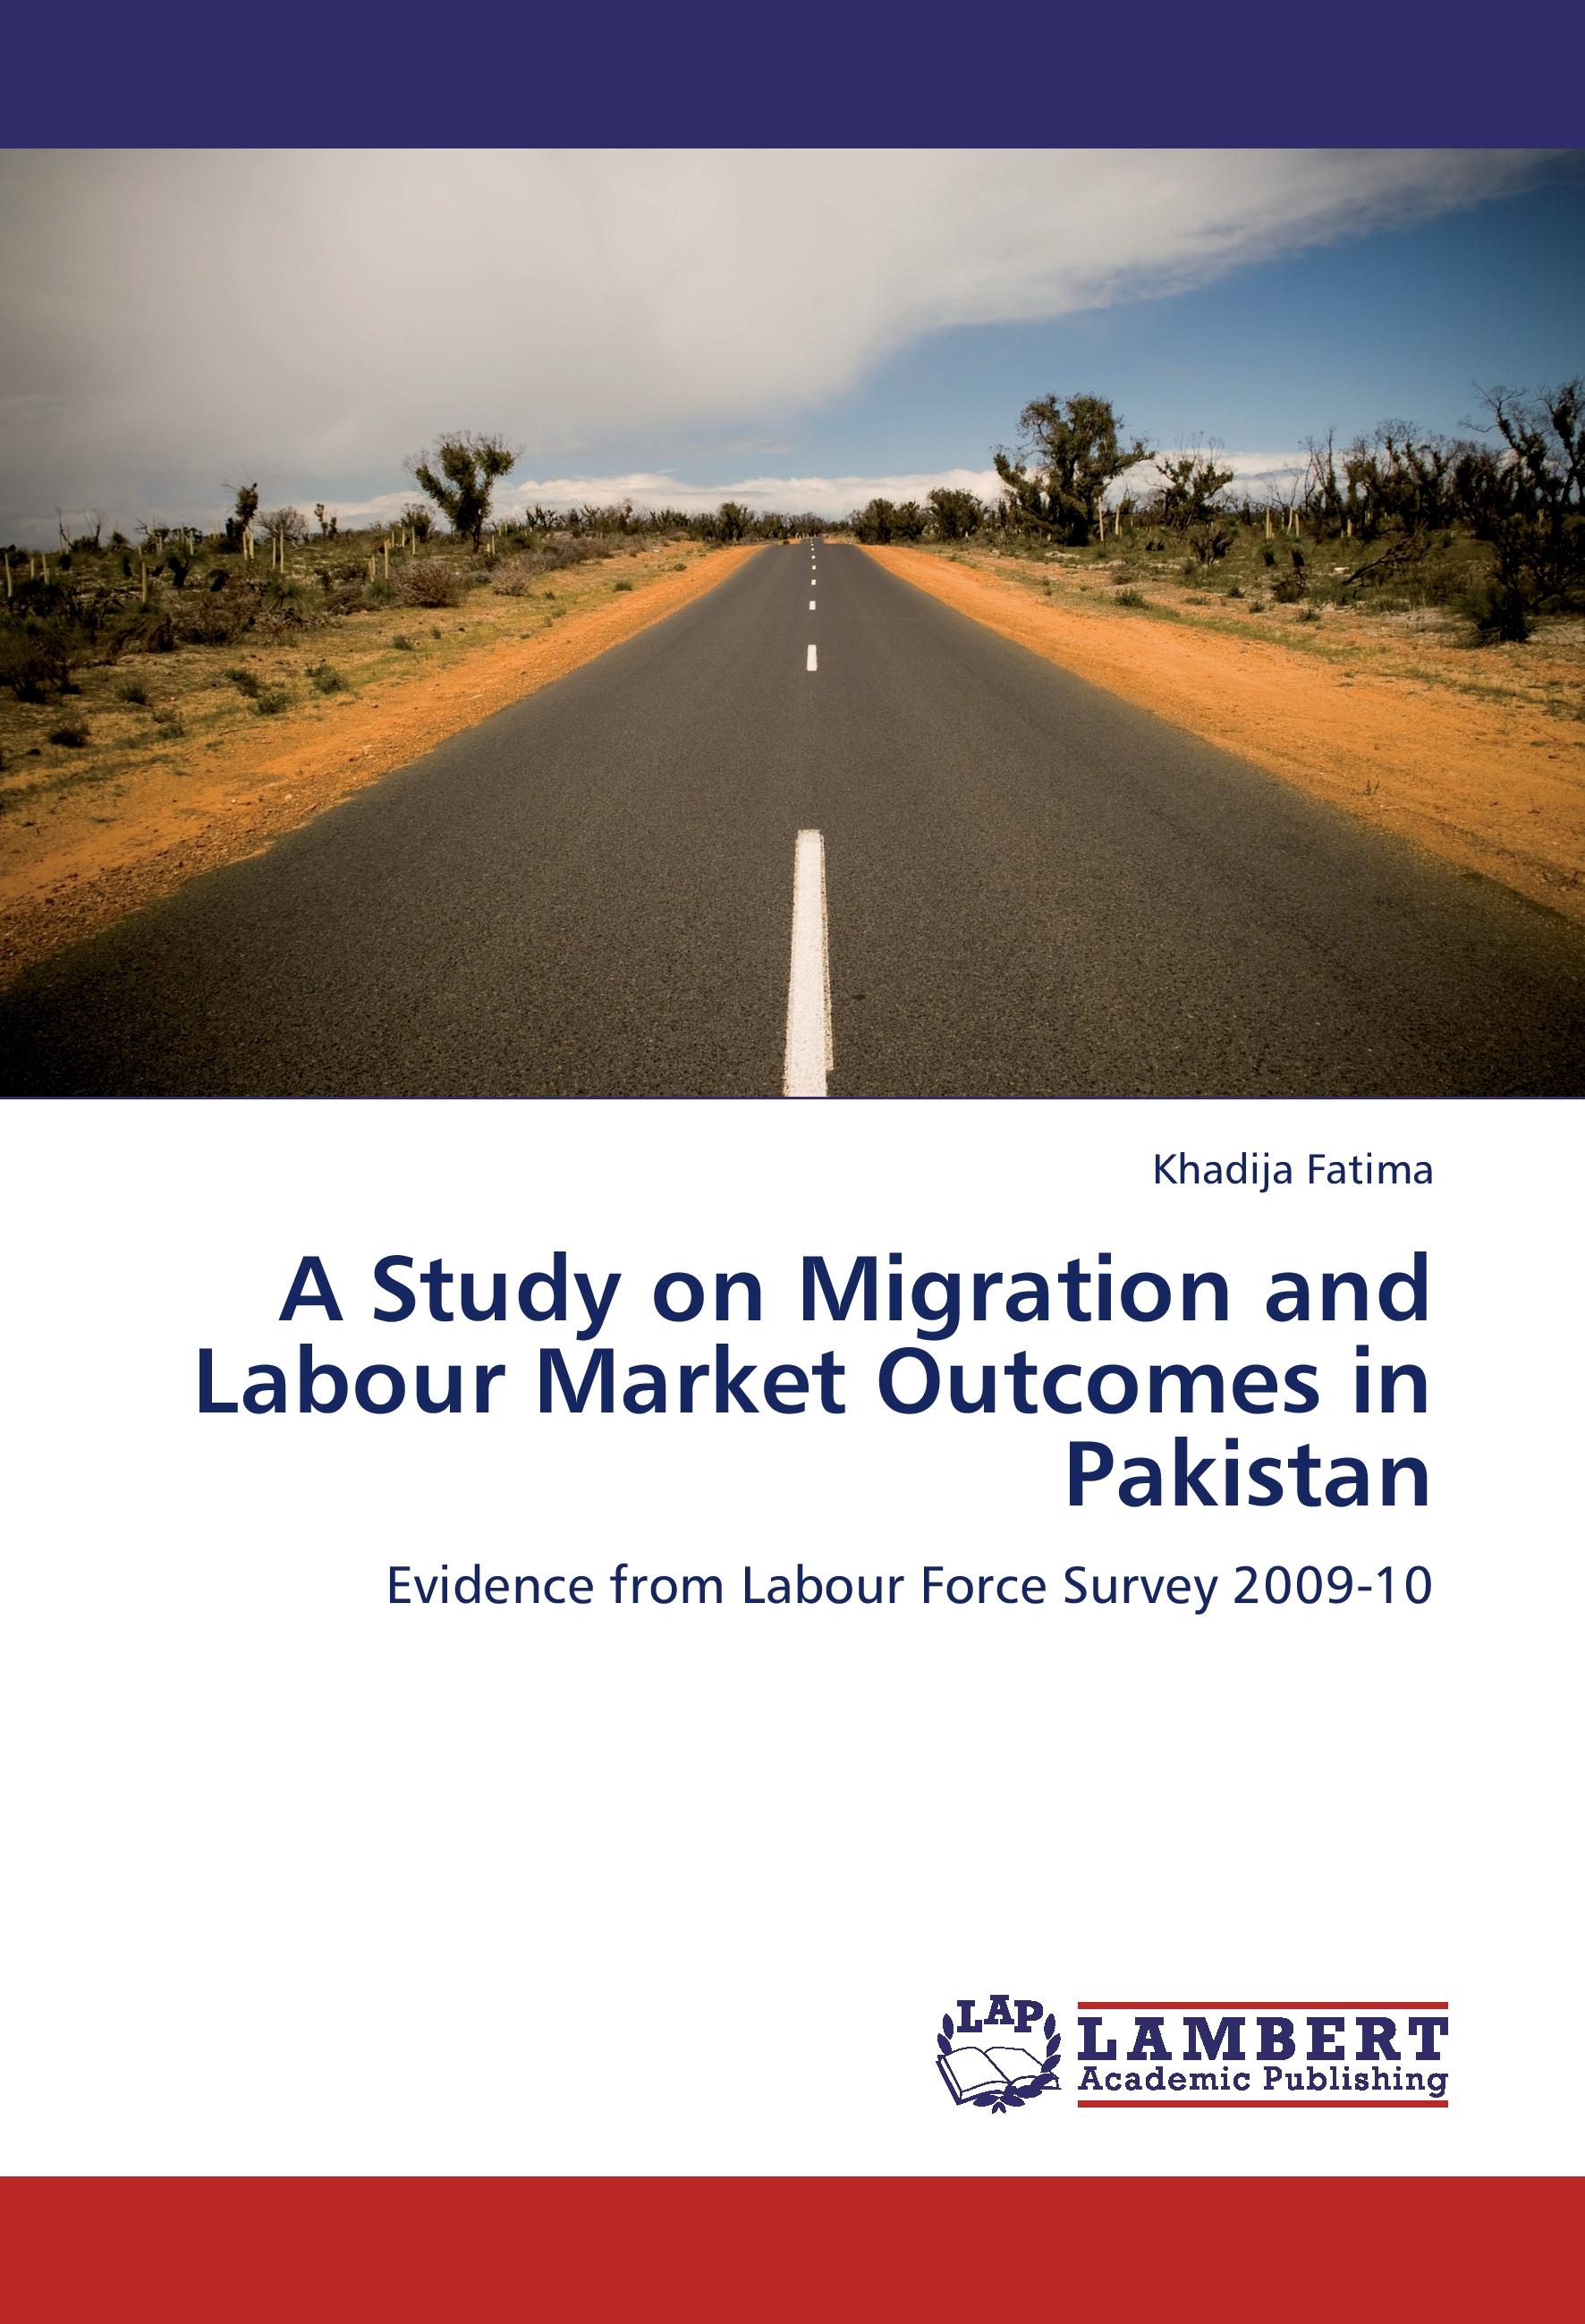 A Study on Migration and Labour Market Outcomes in Pakistan / Evidence from Labour Force Survey 2009-10 / Khadija Fatima / Taschenbuch / Paperback / 176 S. / Englisch / 2012 / EAN 9783659271373 - Fatima, Khadija